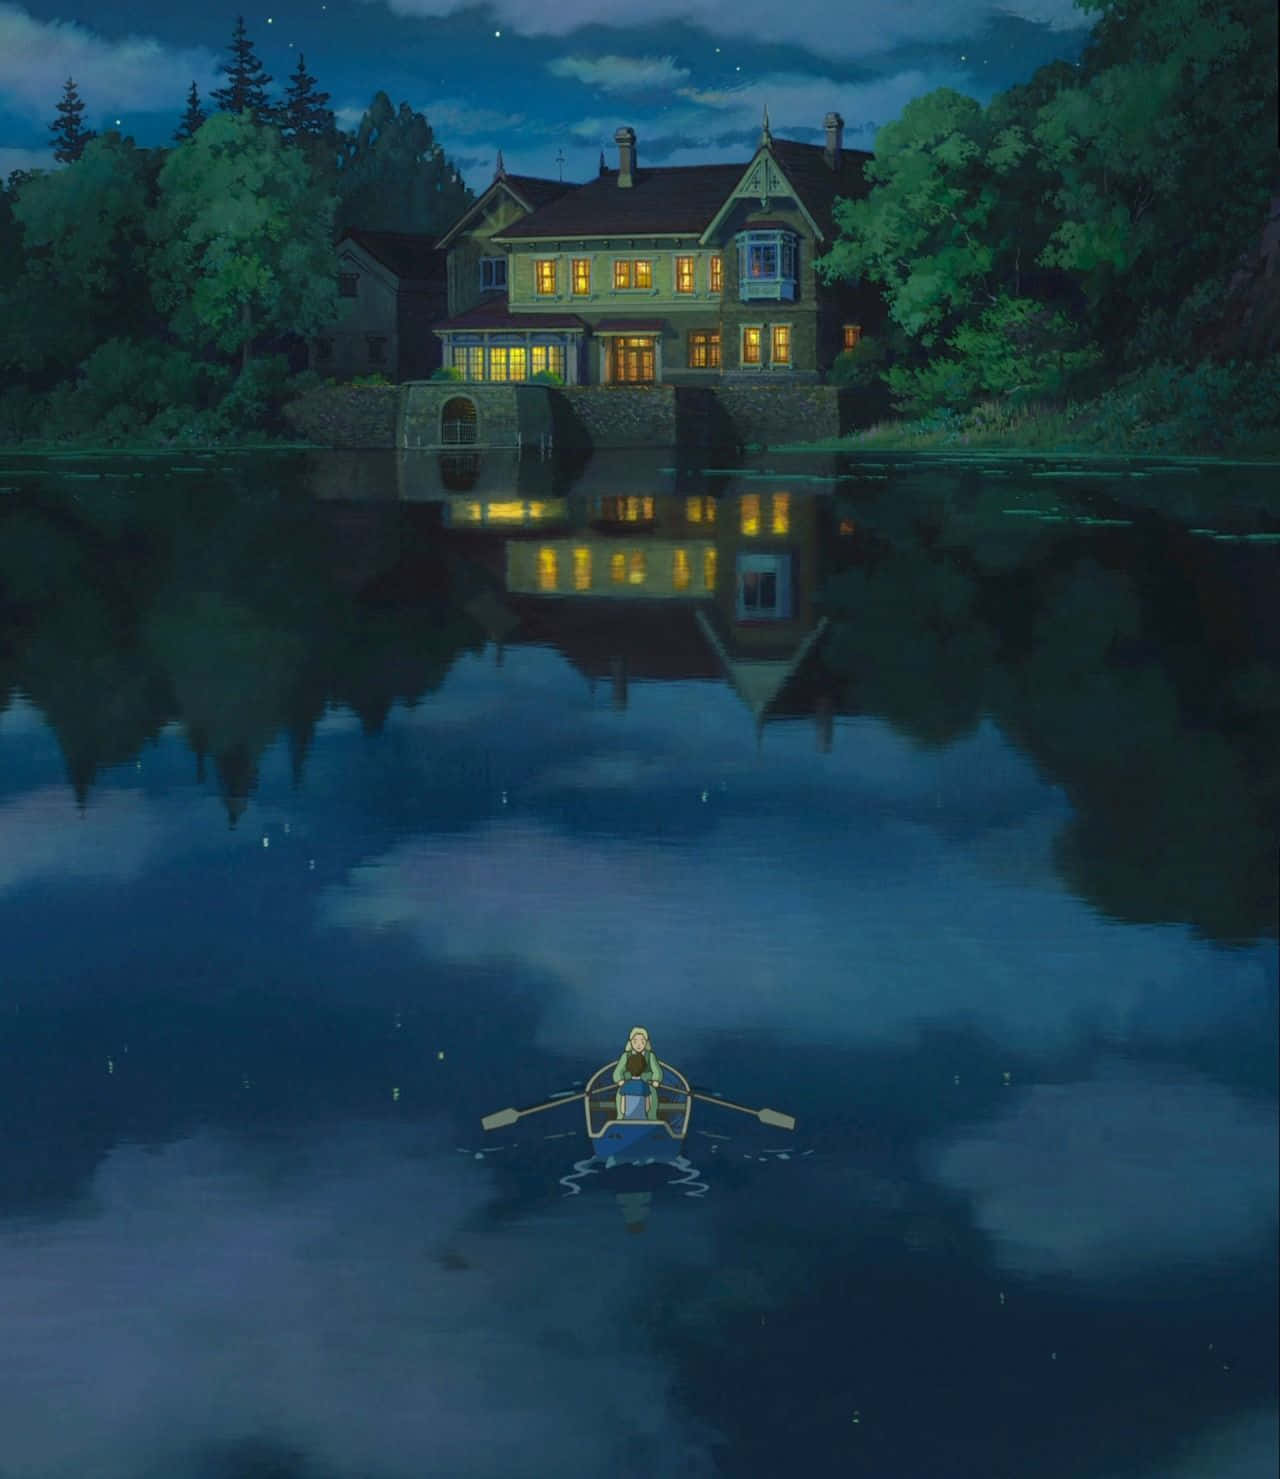 Marnie and Anna enjoying a heartfelt moment by the water in a beautiful scene from the movie "When Marnie Was There" Wallpaper